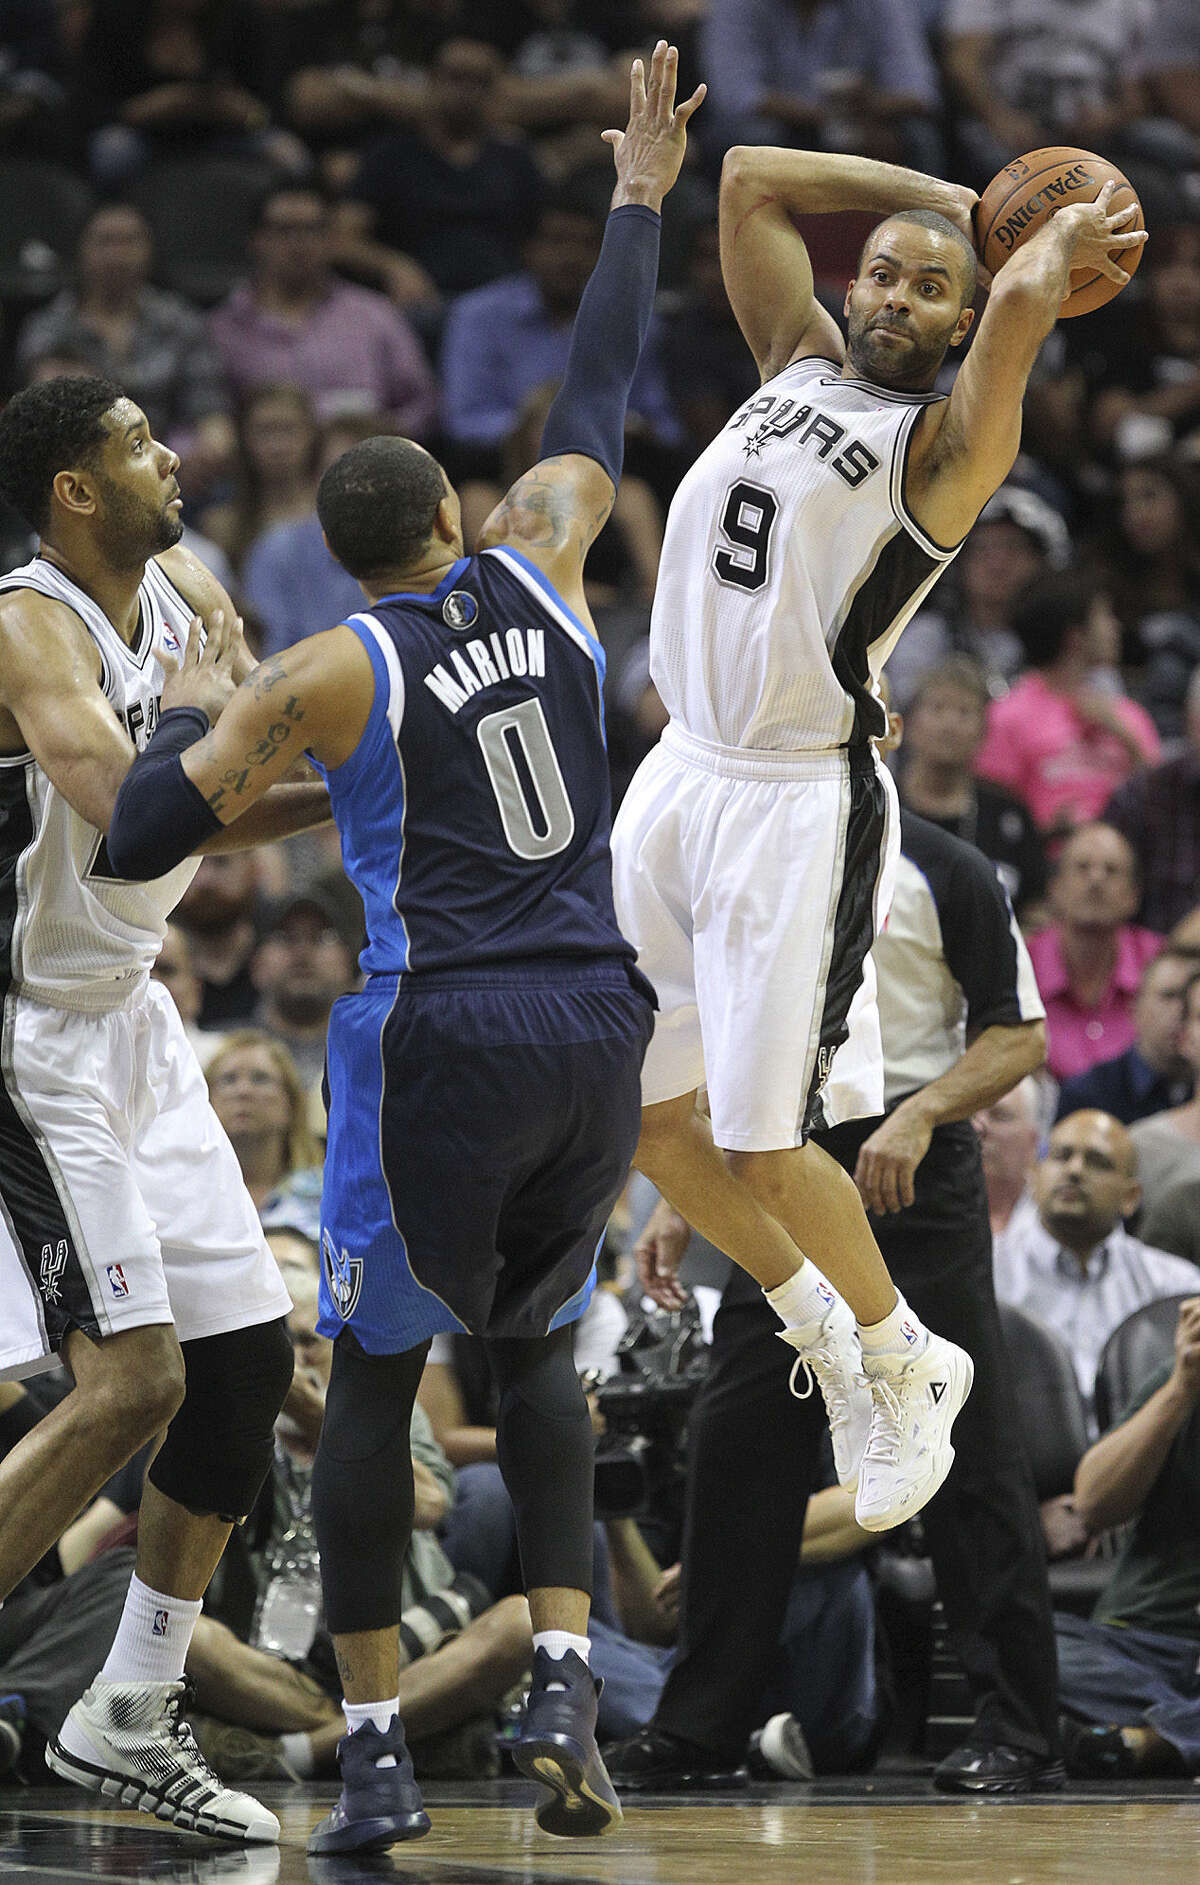 Tony Parker, passing around the Mavs' Shawn Marion, scored just 12 points on 5-of-10 shooting in the Spurs' Game 2 loss Wednesday at the AT&T Center.